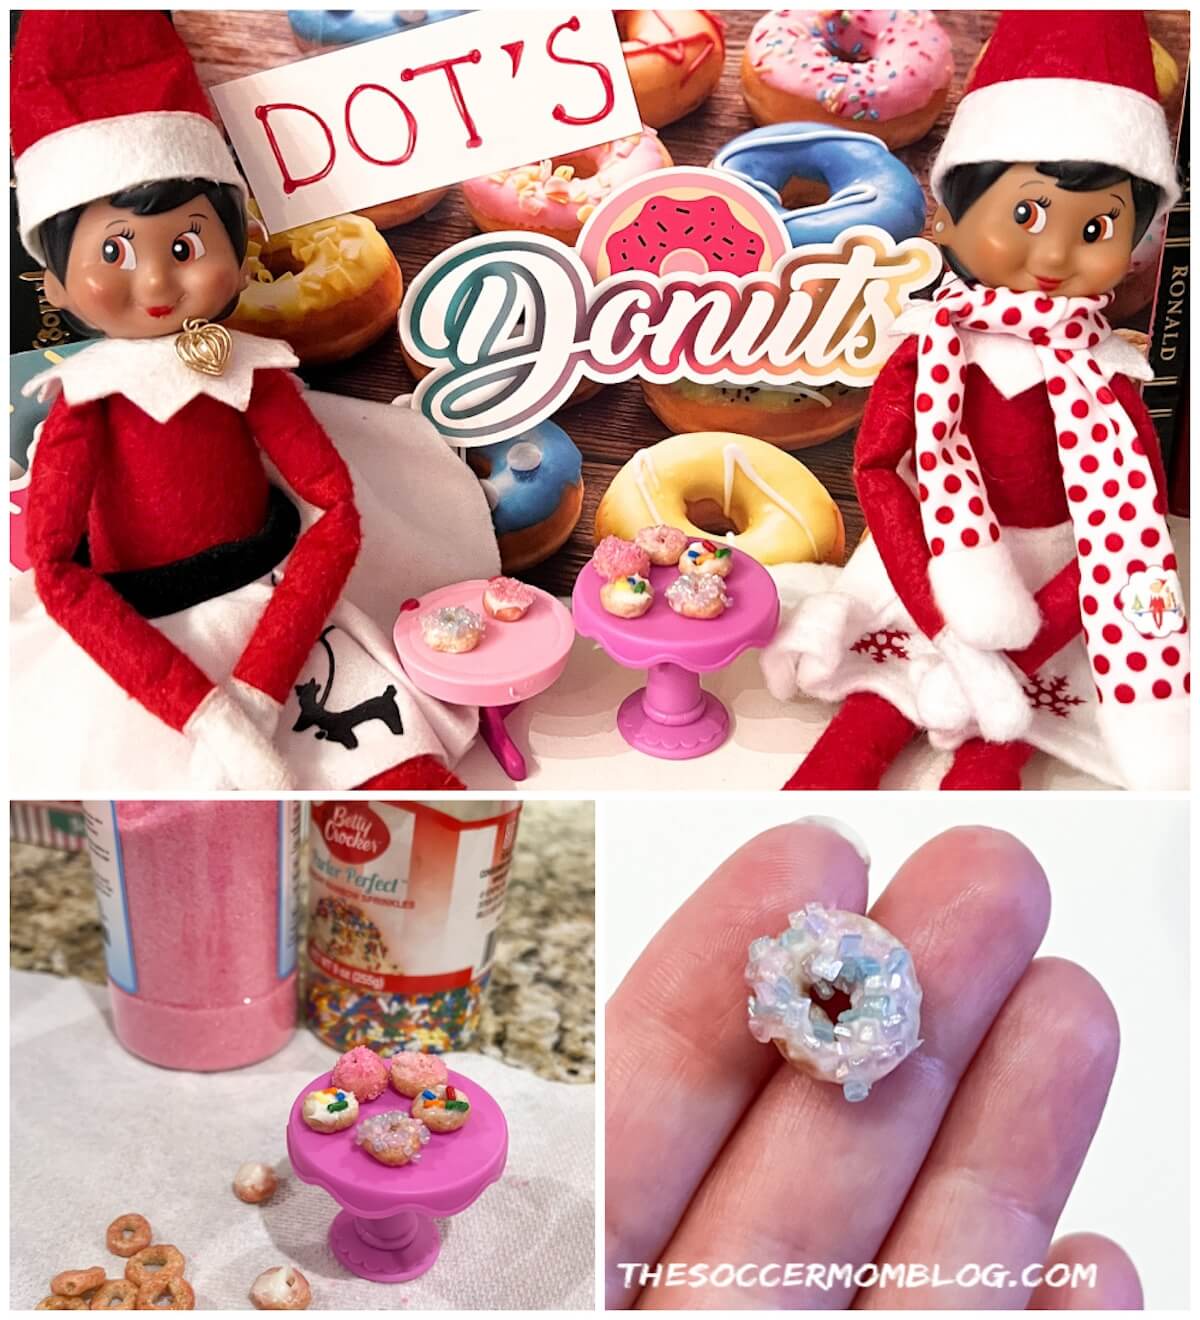 collage image of Elf dolls with Cheerio "donuts".